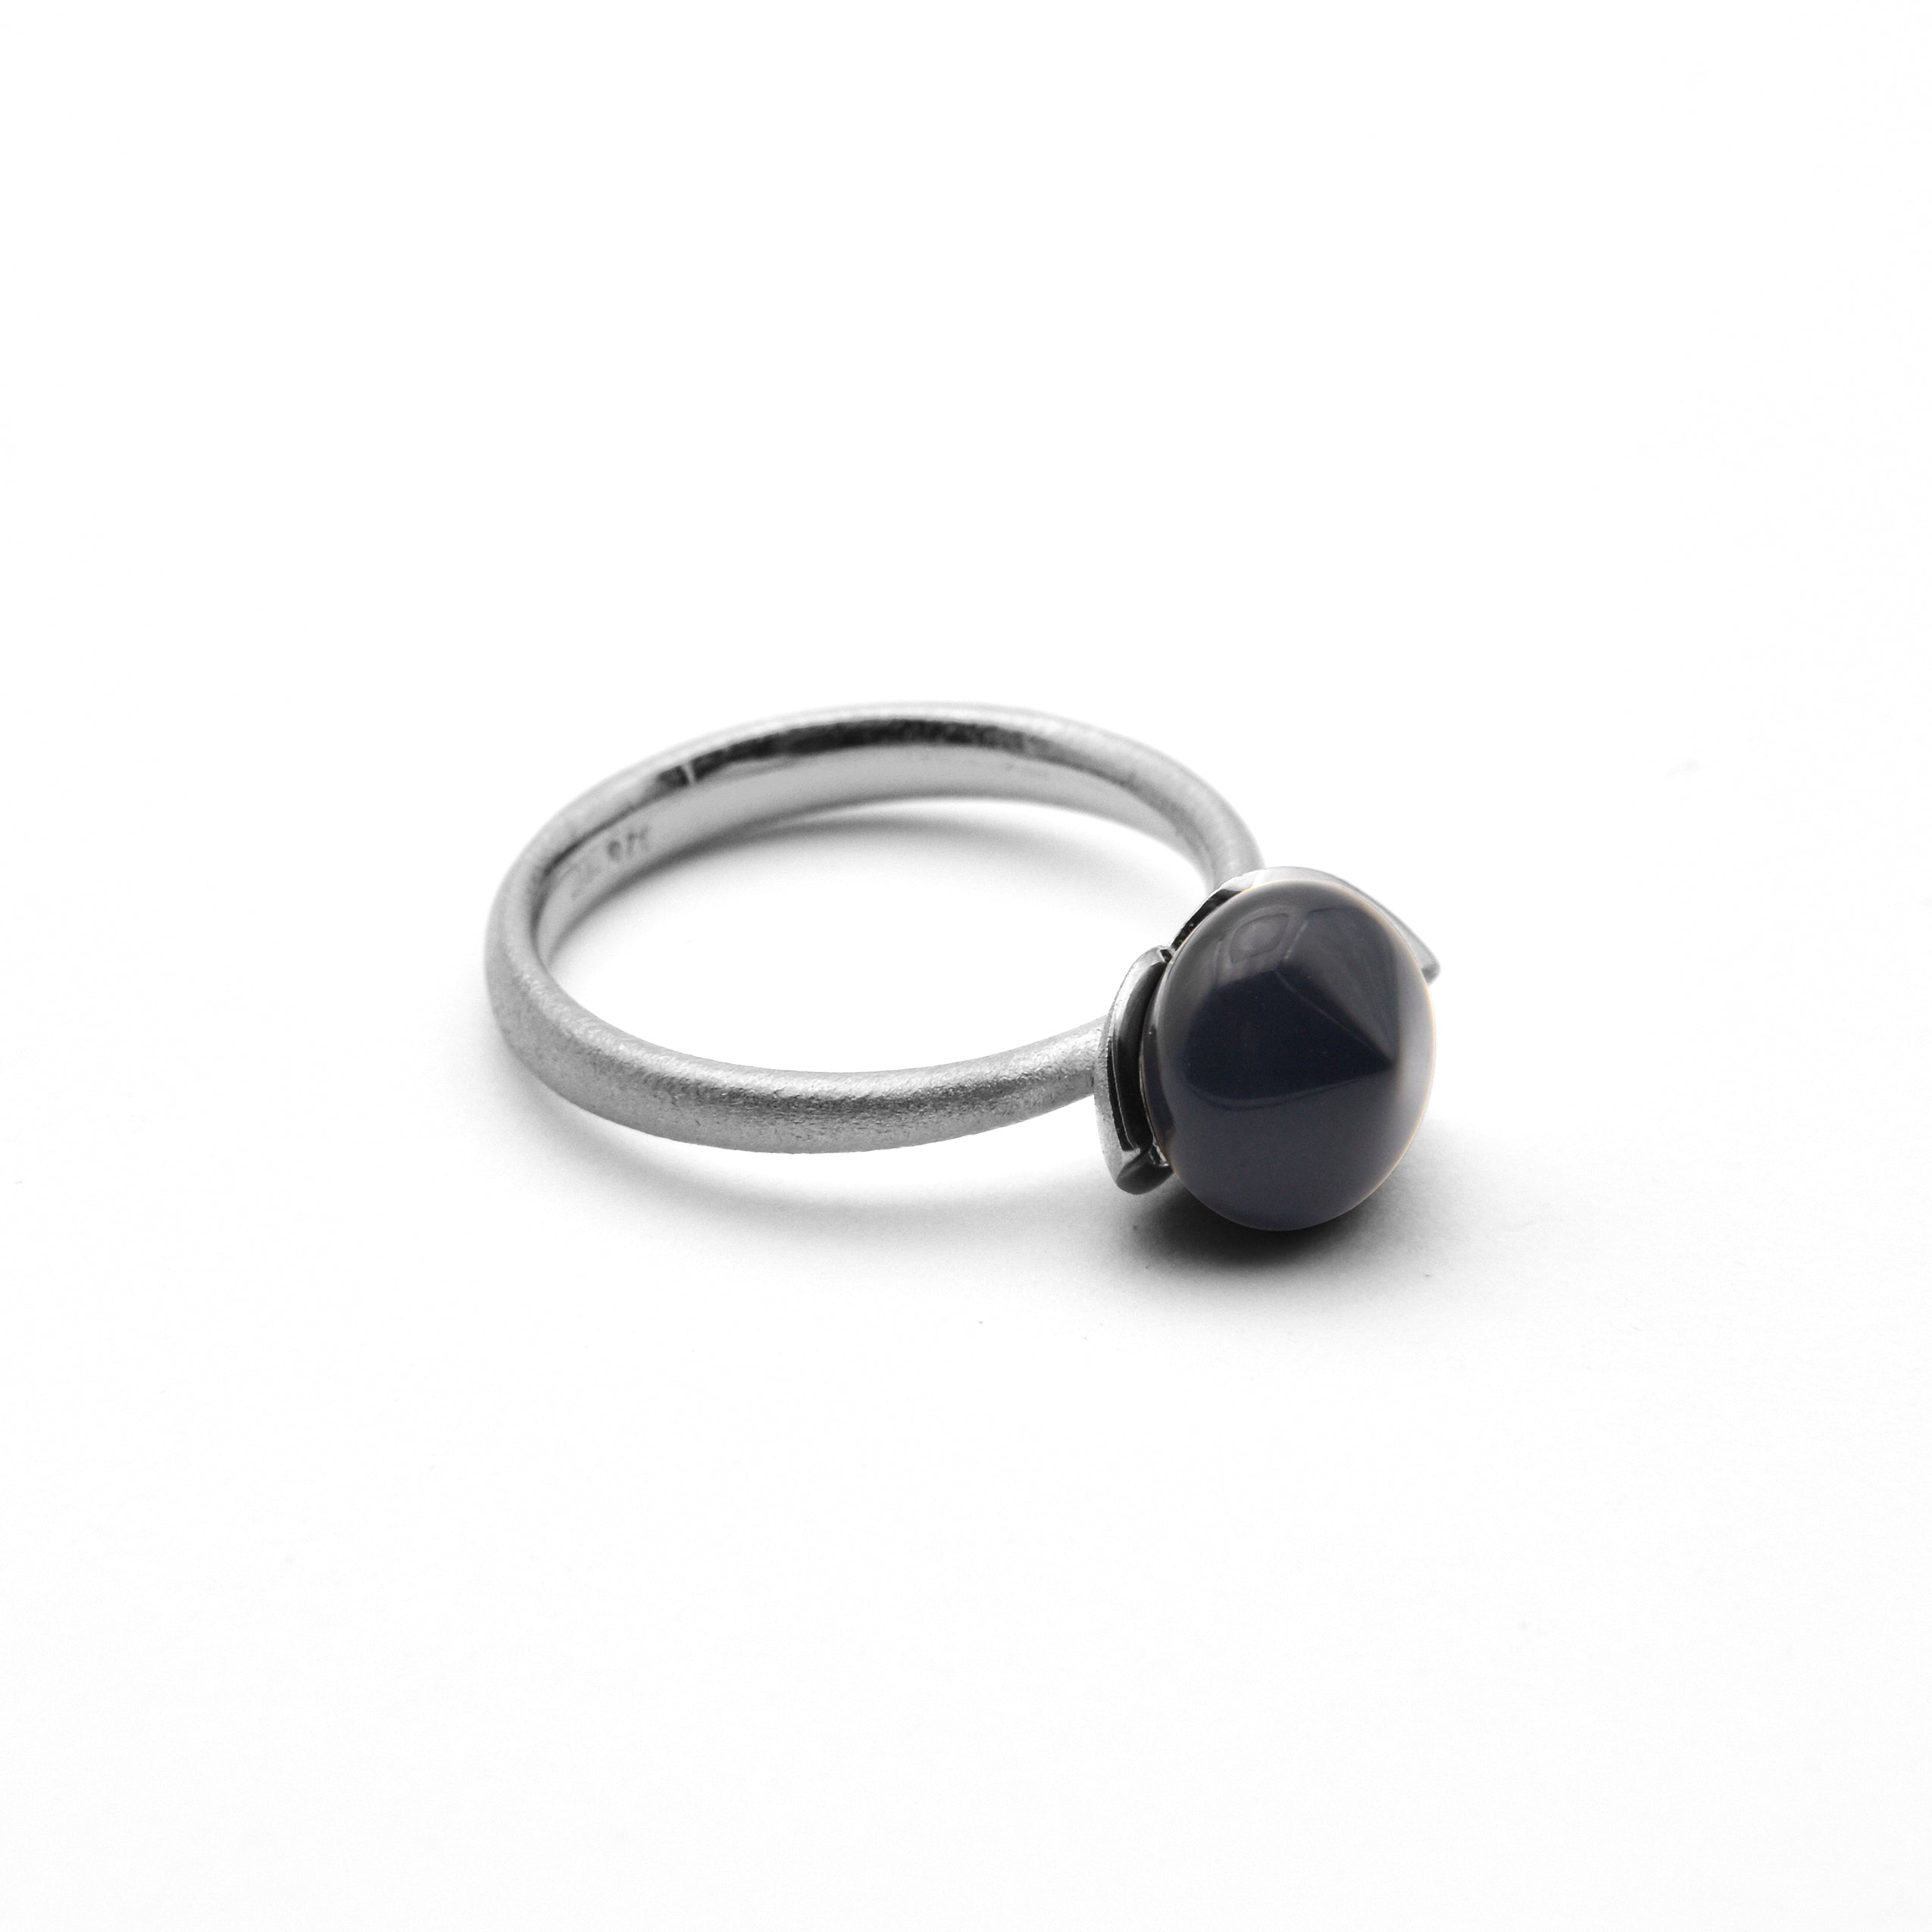 Dolce-ring "smal" med onix 925/-.